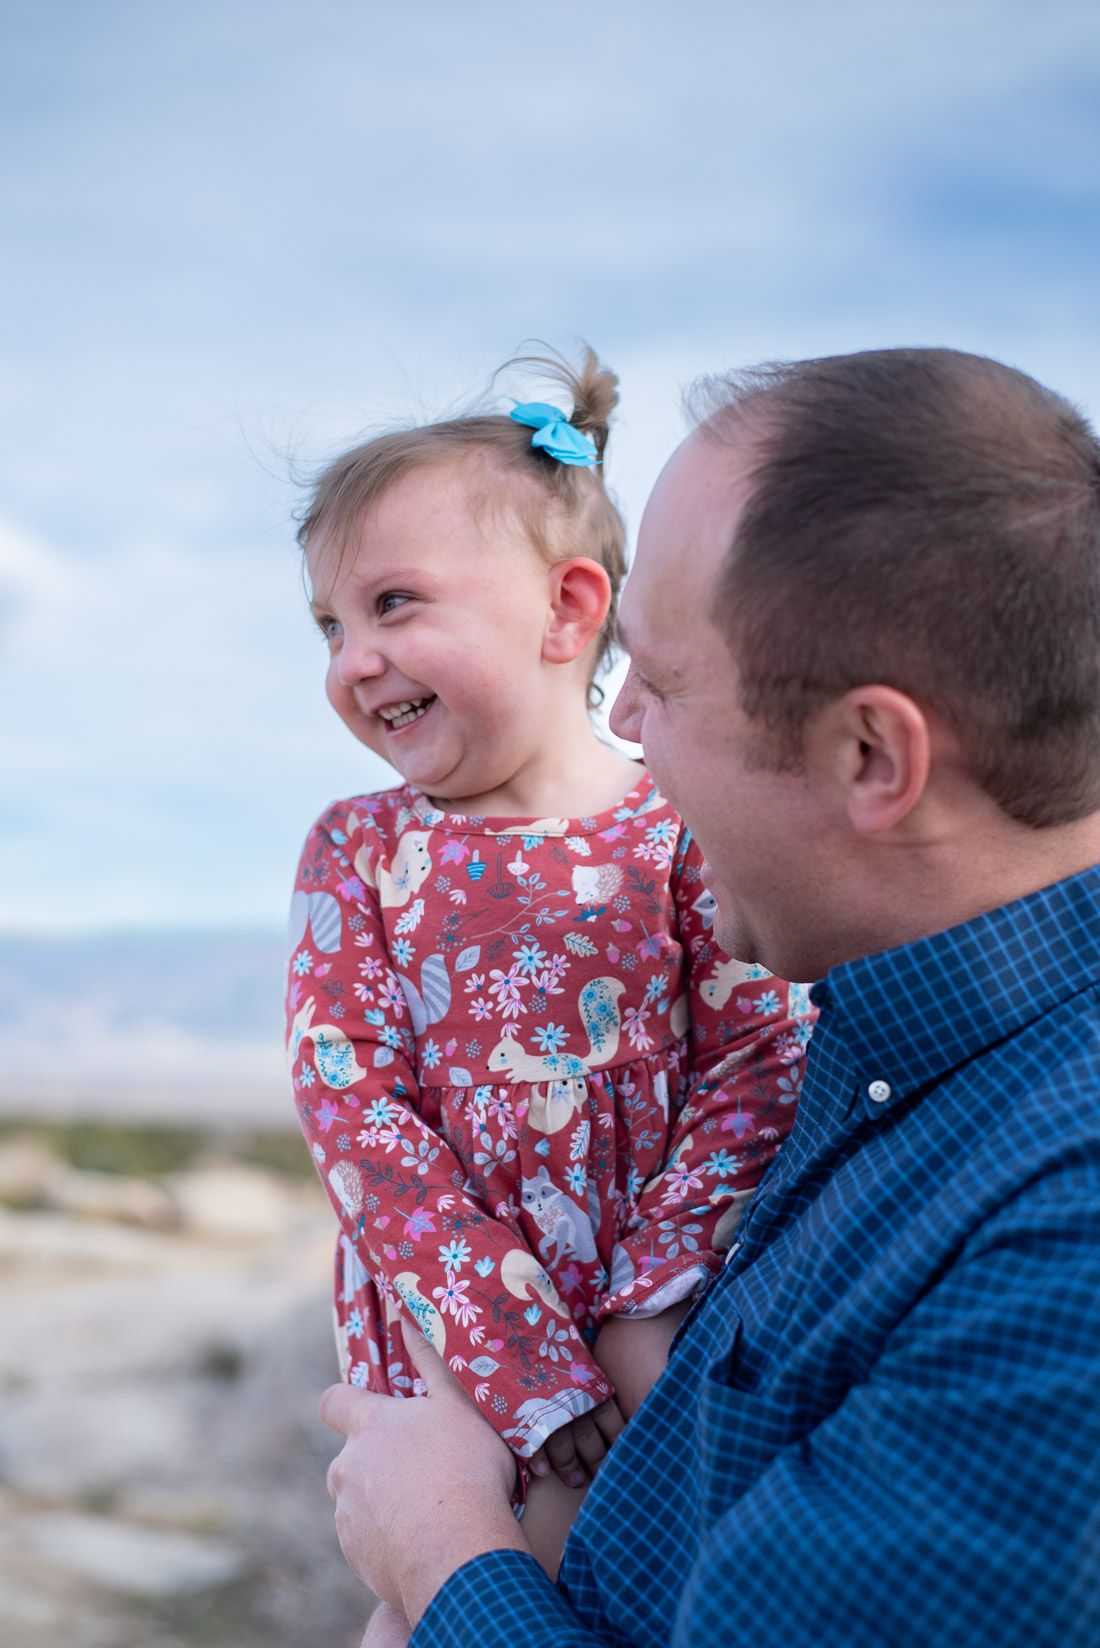 Cedar City, Utah dad holding daughter while she is smiling-Bethany Allen Photography